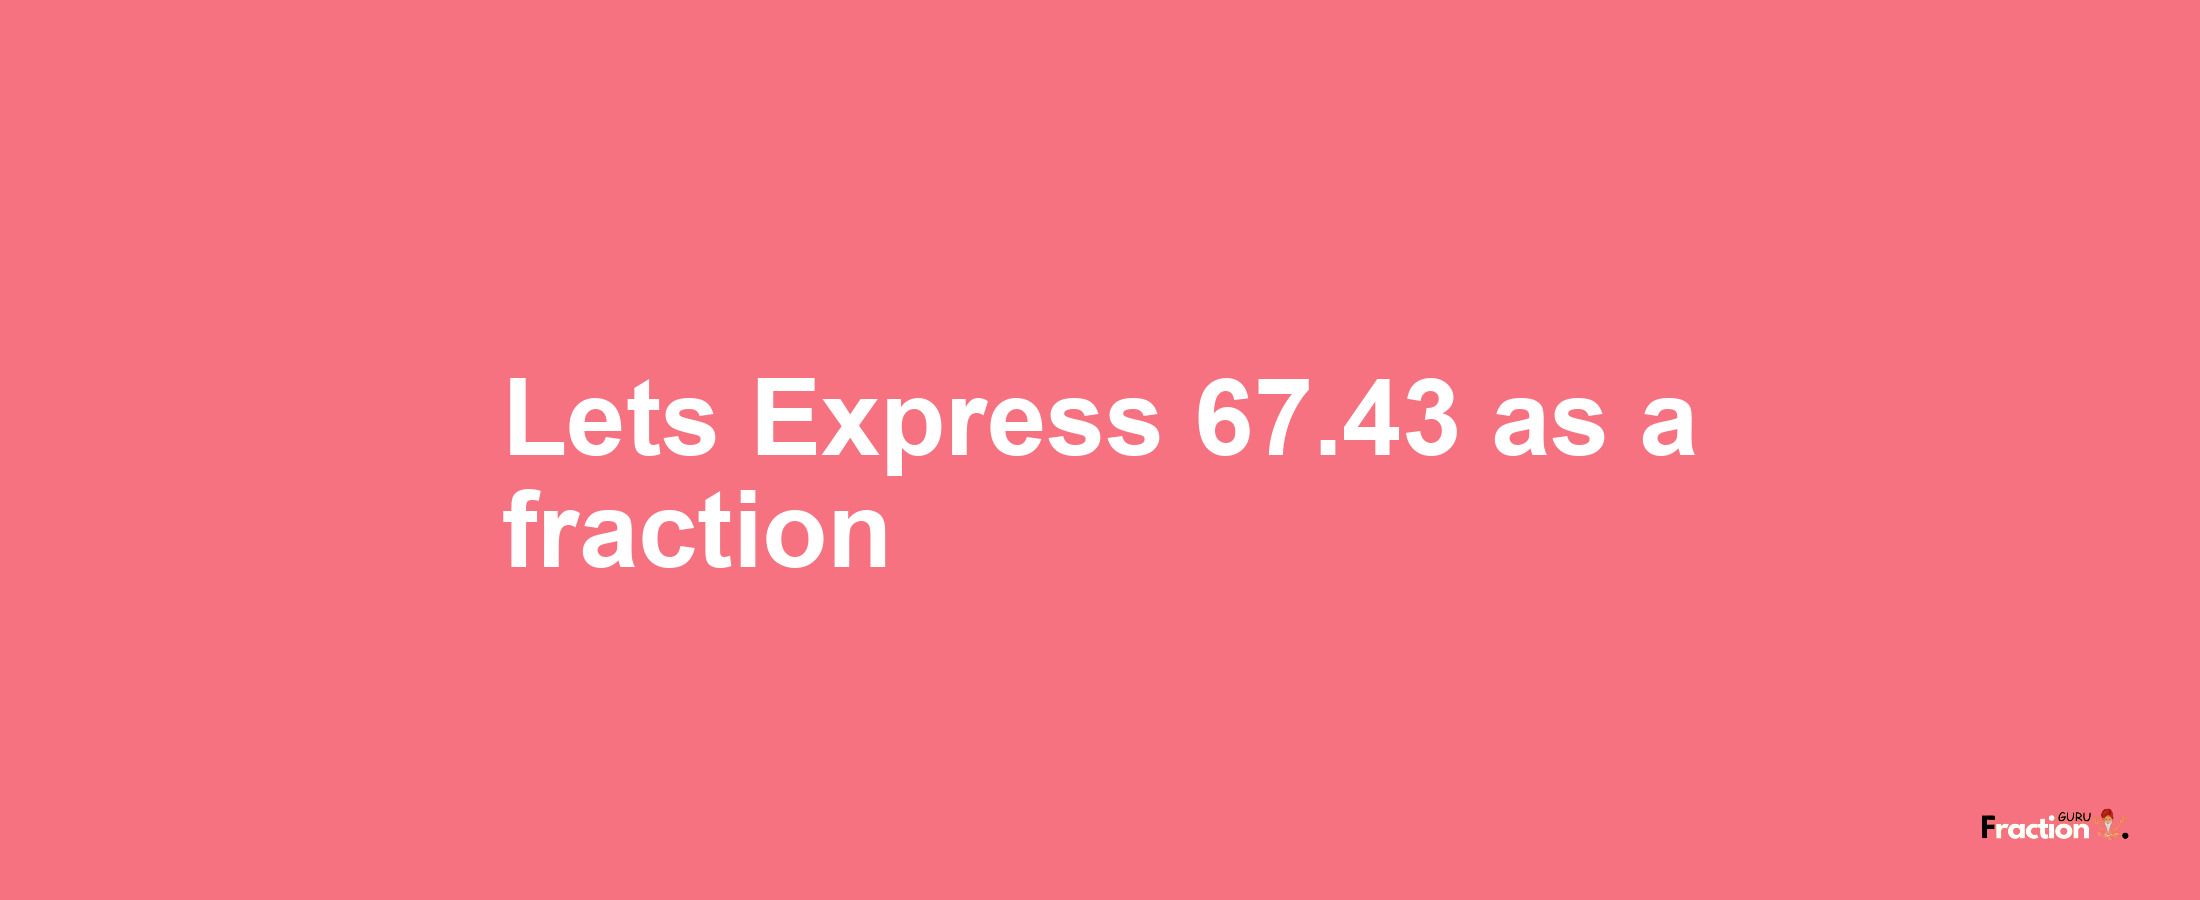 Lets Express 67.43 as afraction